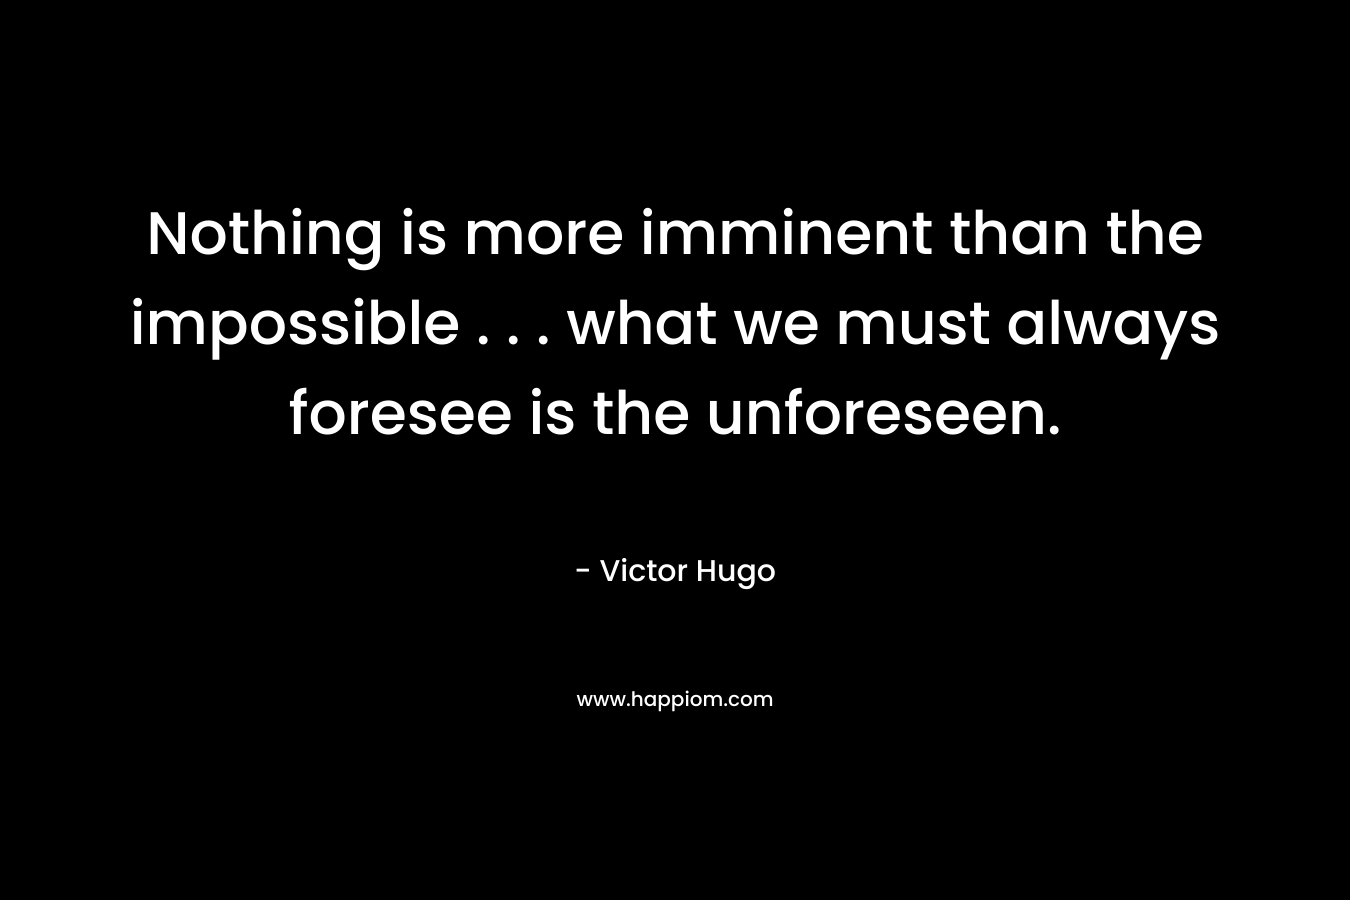 Nothing is more imminent than the impossible . . . what we must always foresee is the unforeseen. – Victor Hugo